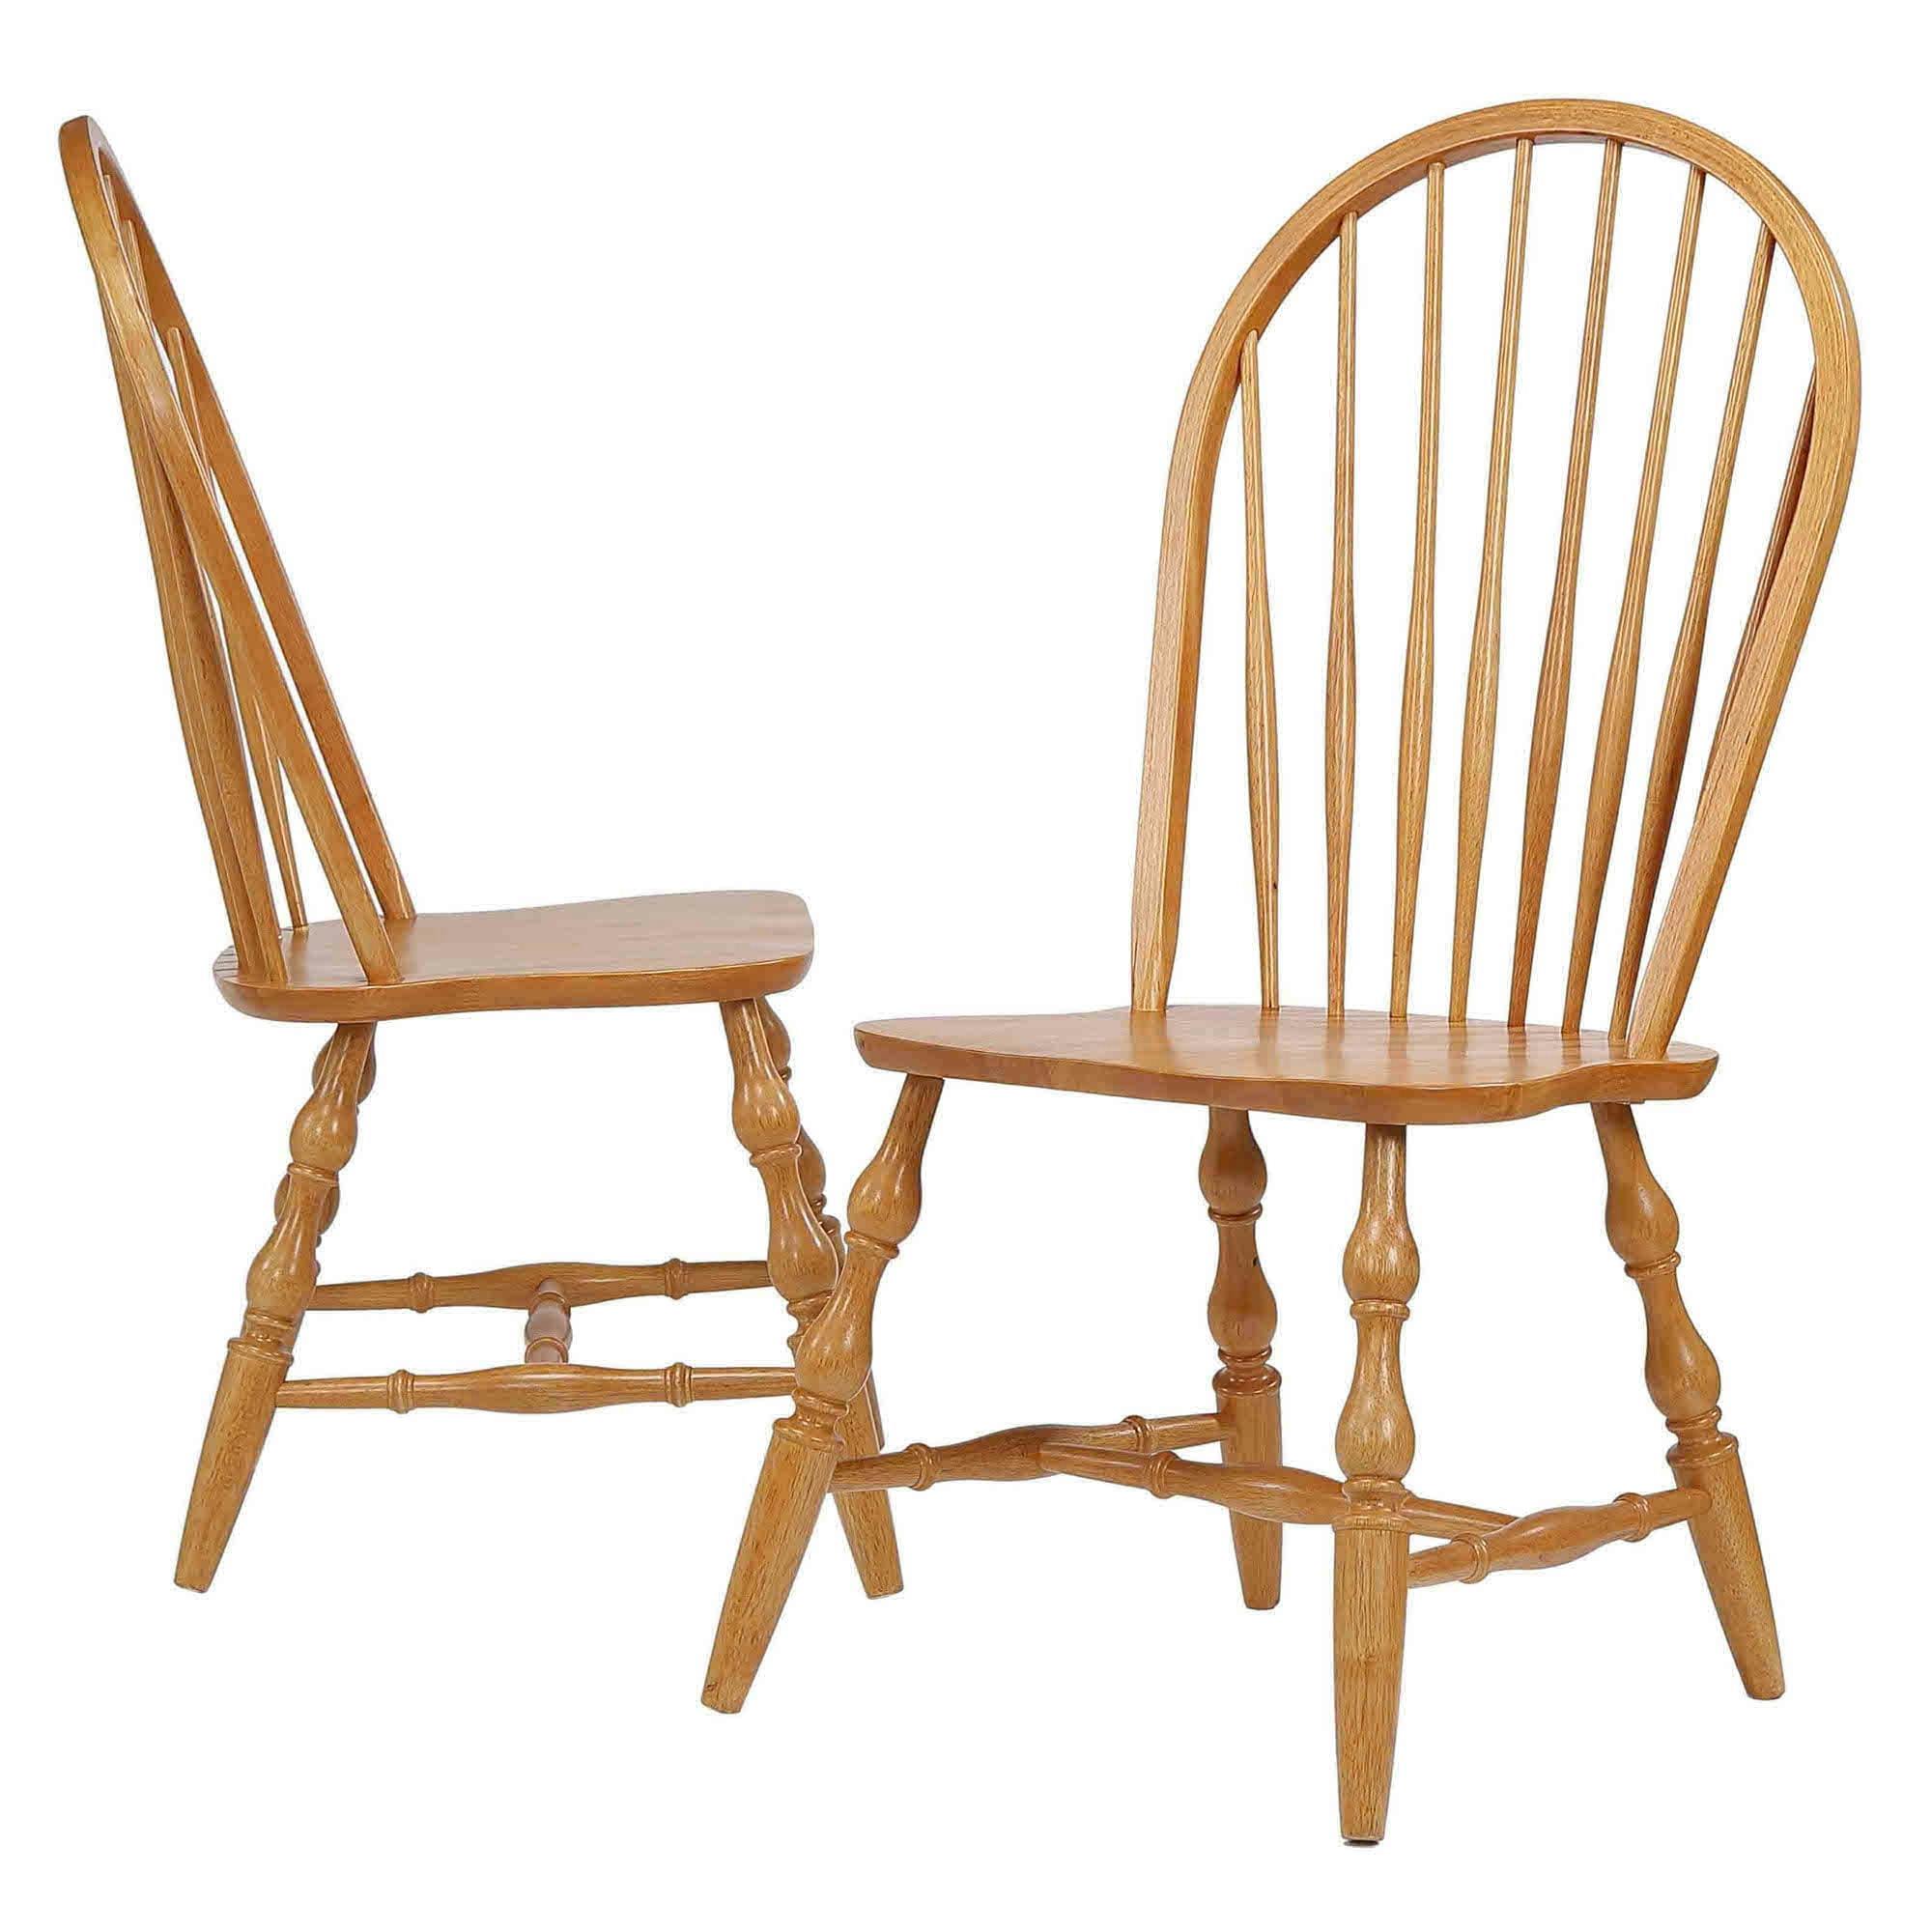 Classic Windsor Solid Wood Brown Arm Chair with Slat Back